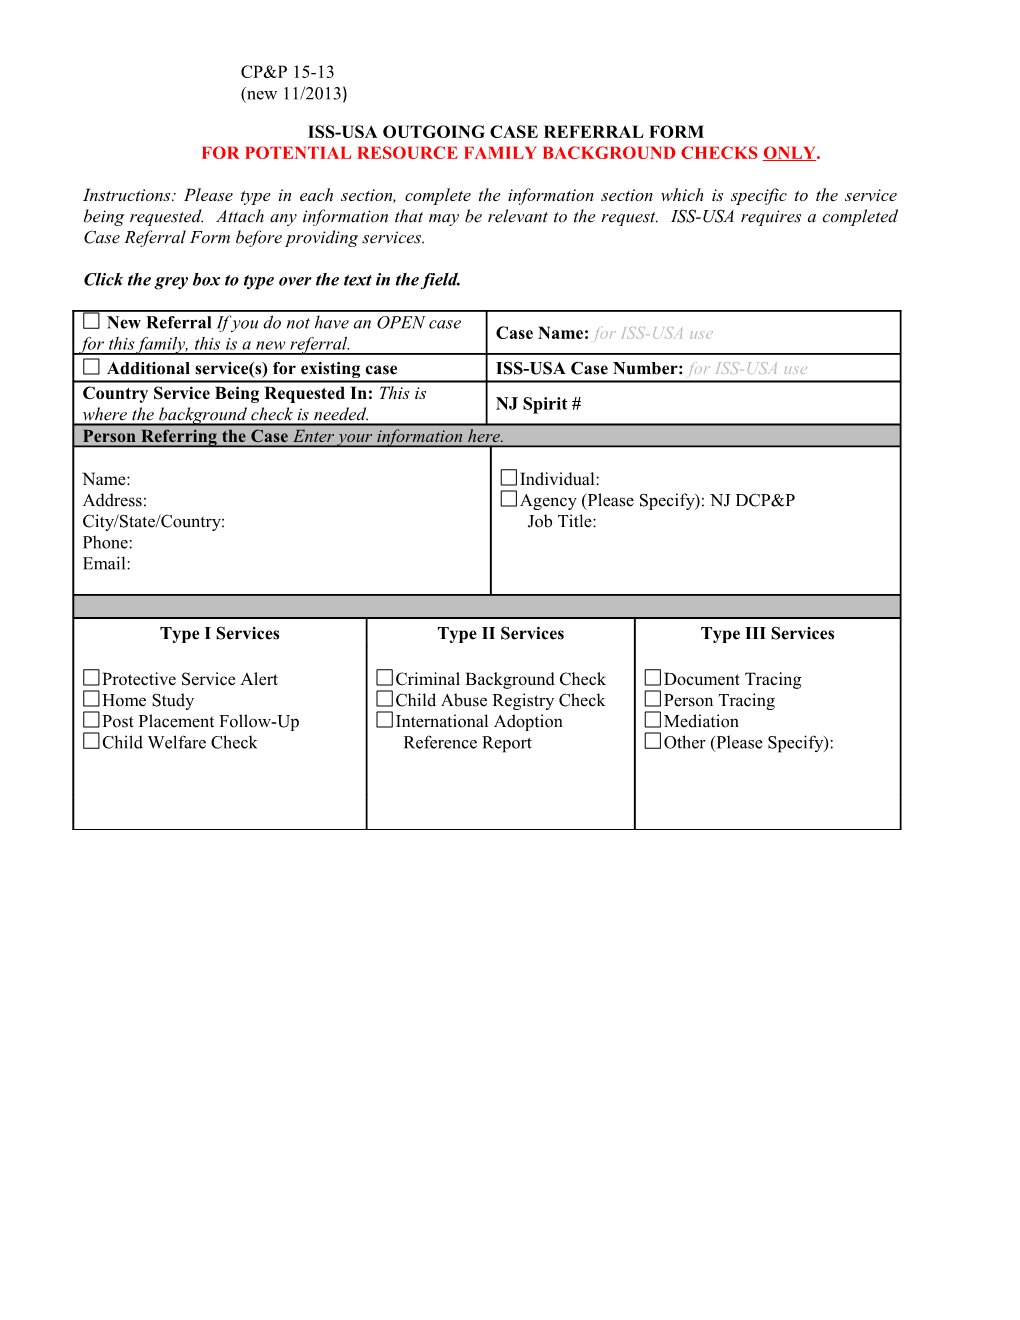 Iss-Usa Outgoing Case Referral Form Cover Page